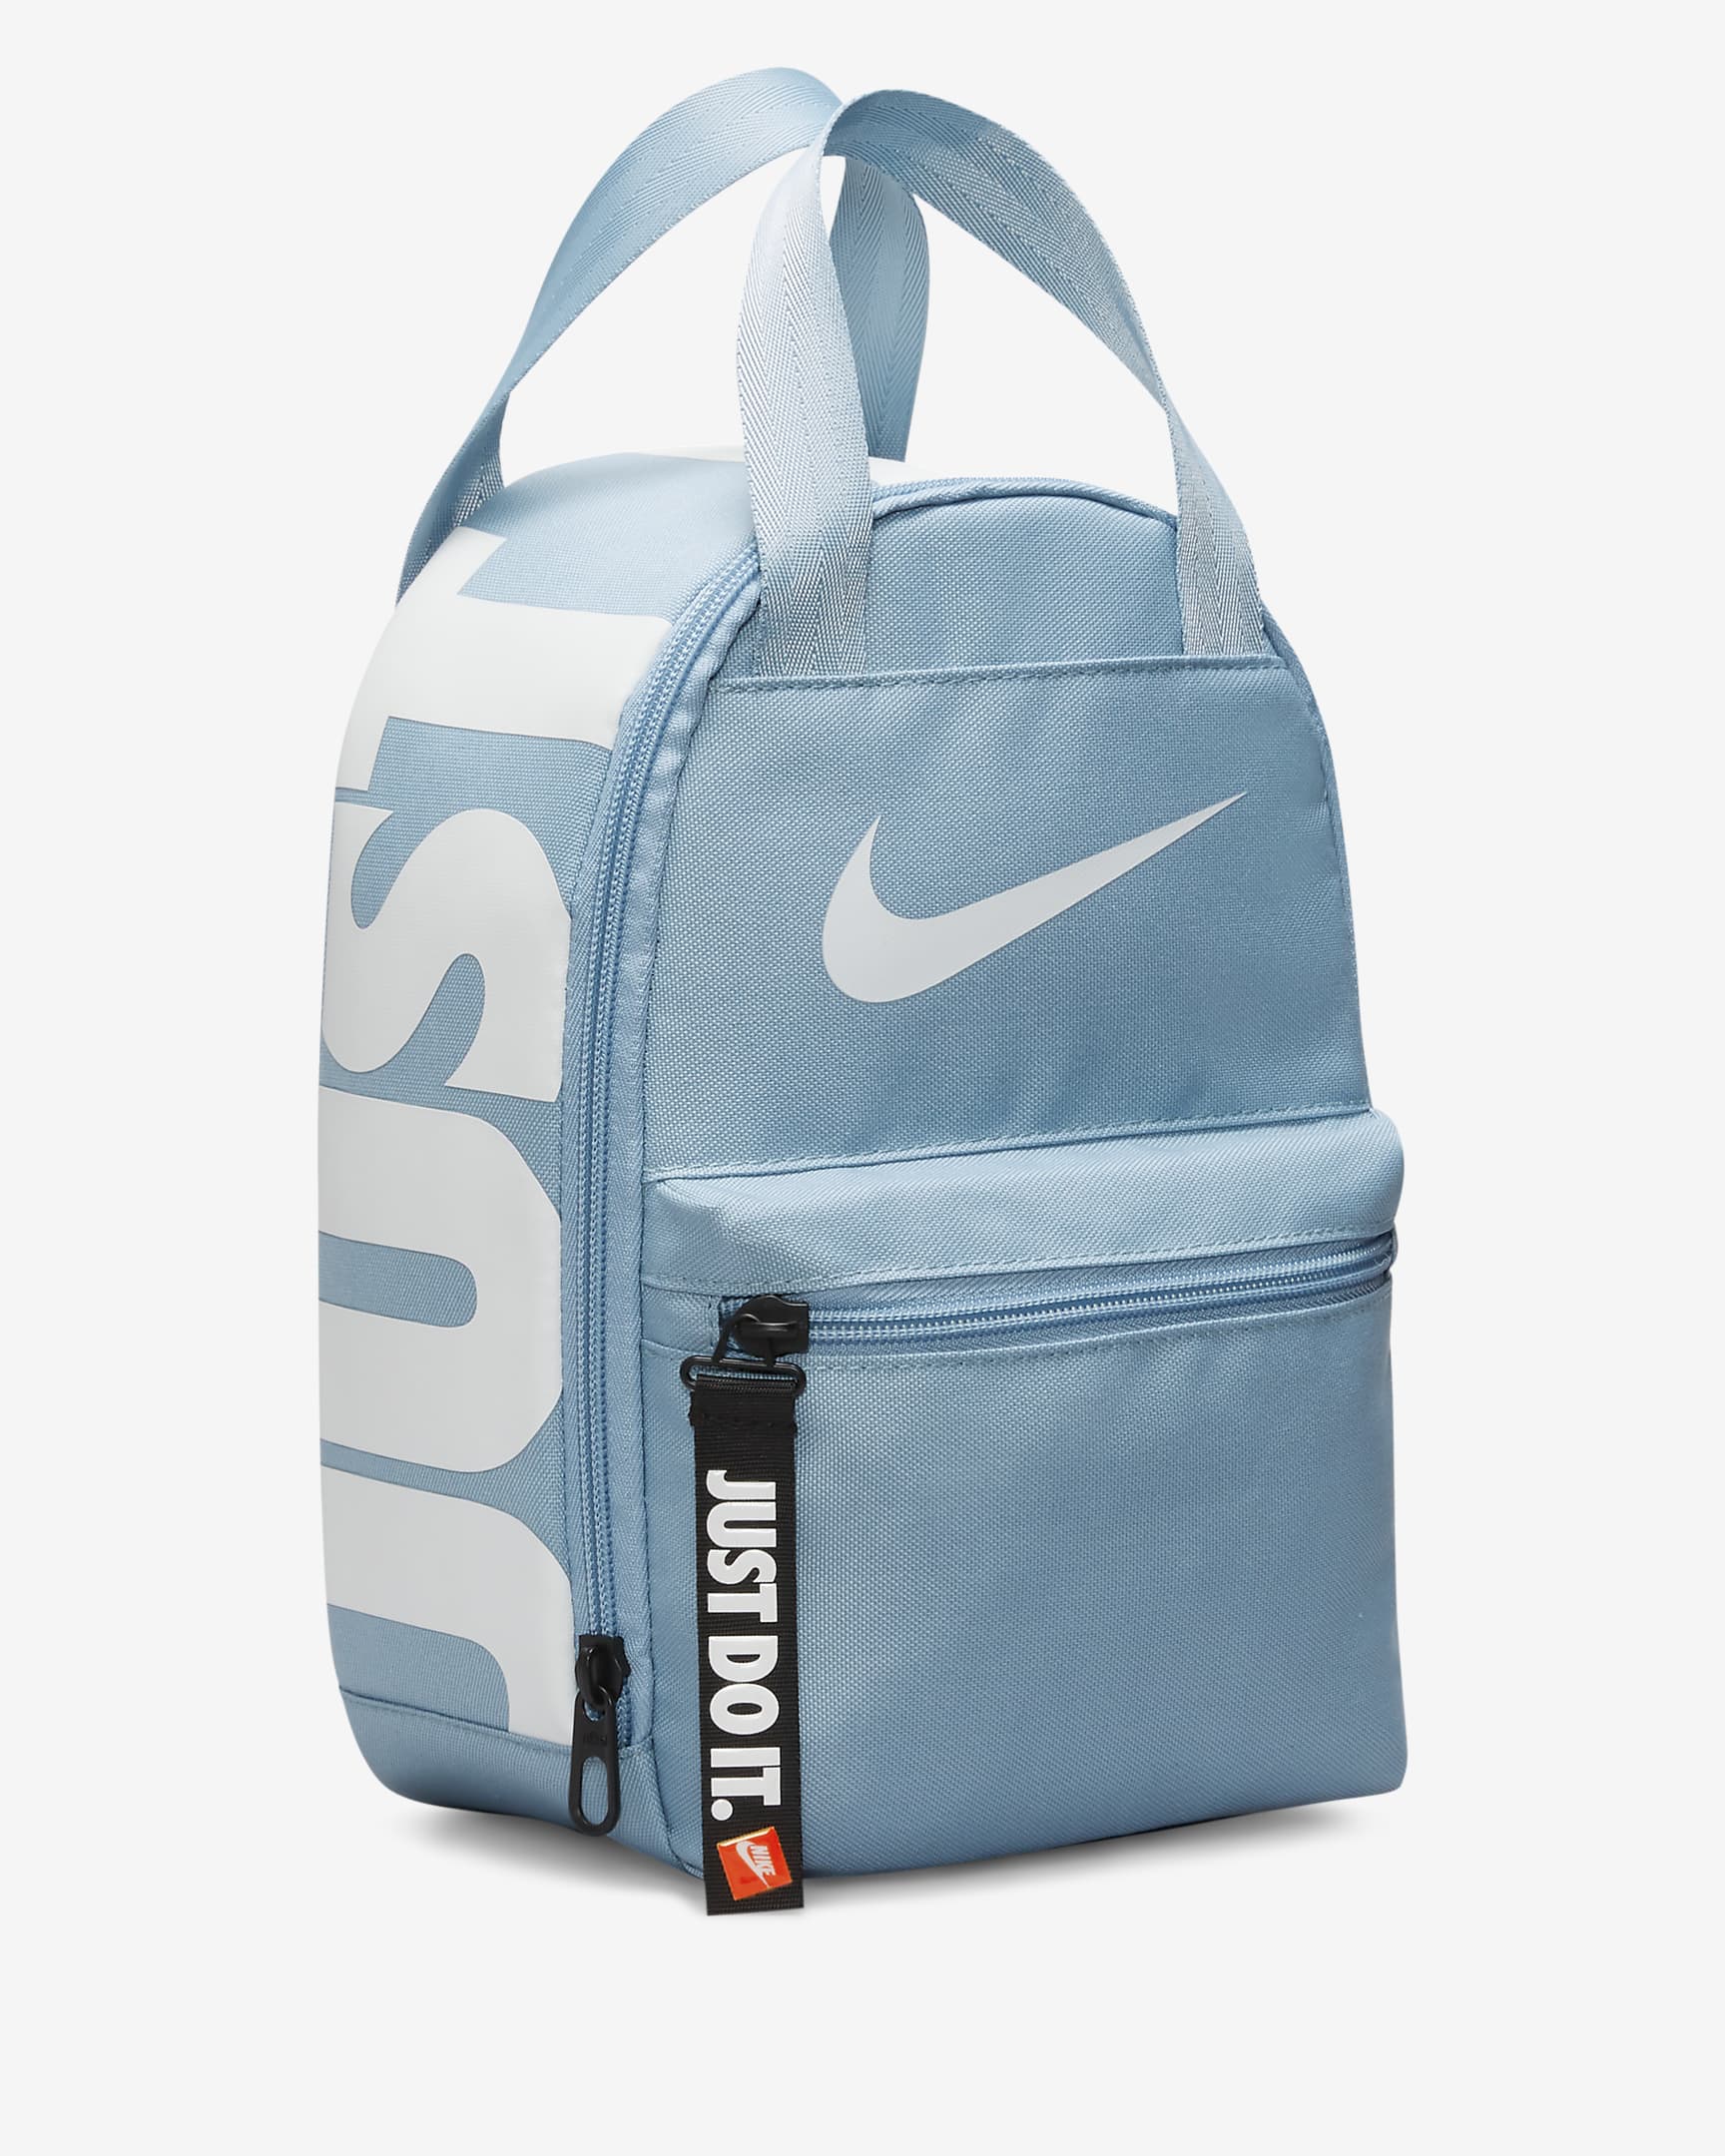 NIKE JUST DO IT ZIP LUNCH BOX - 9A2937